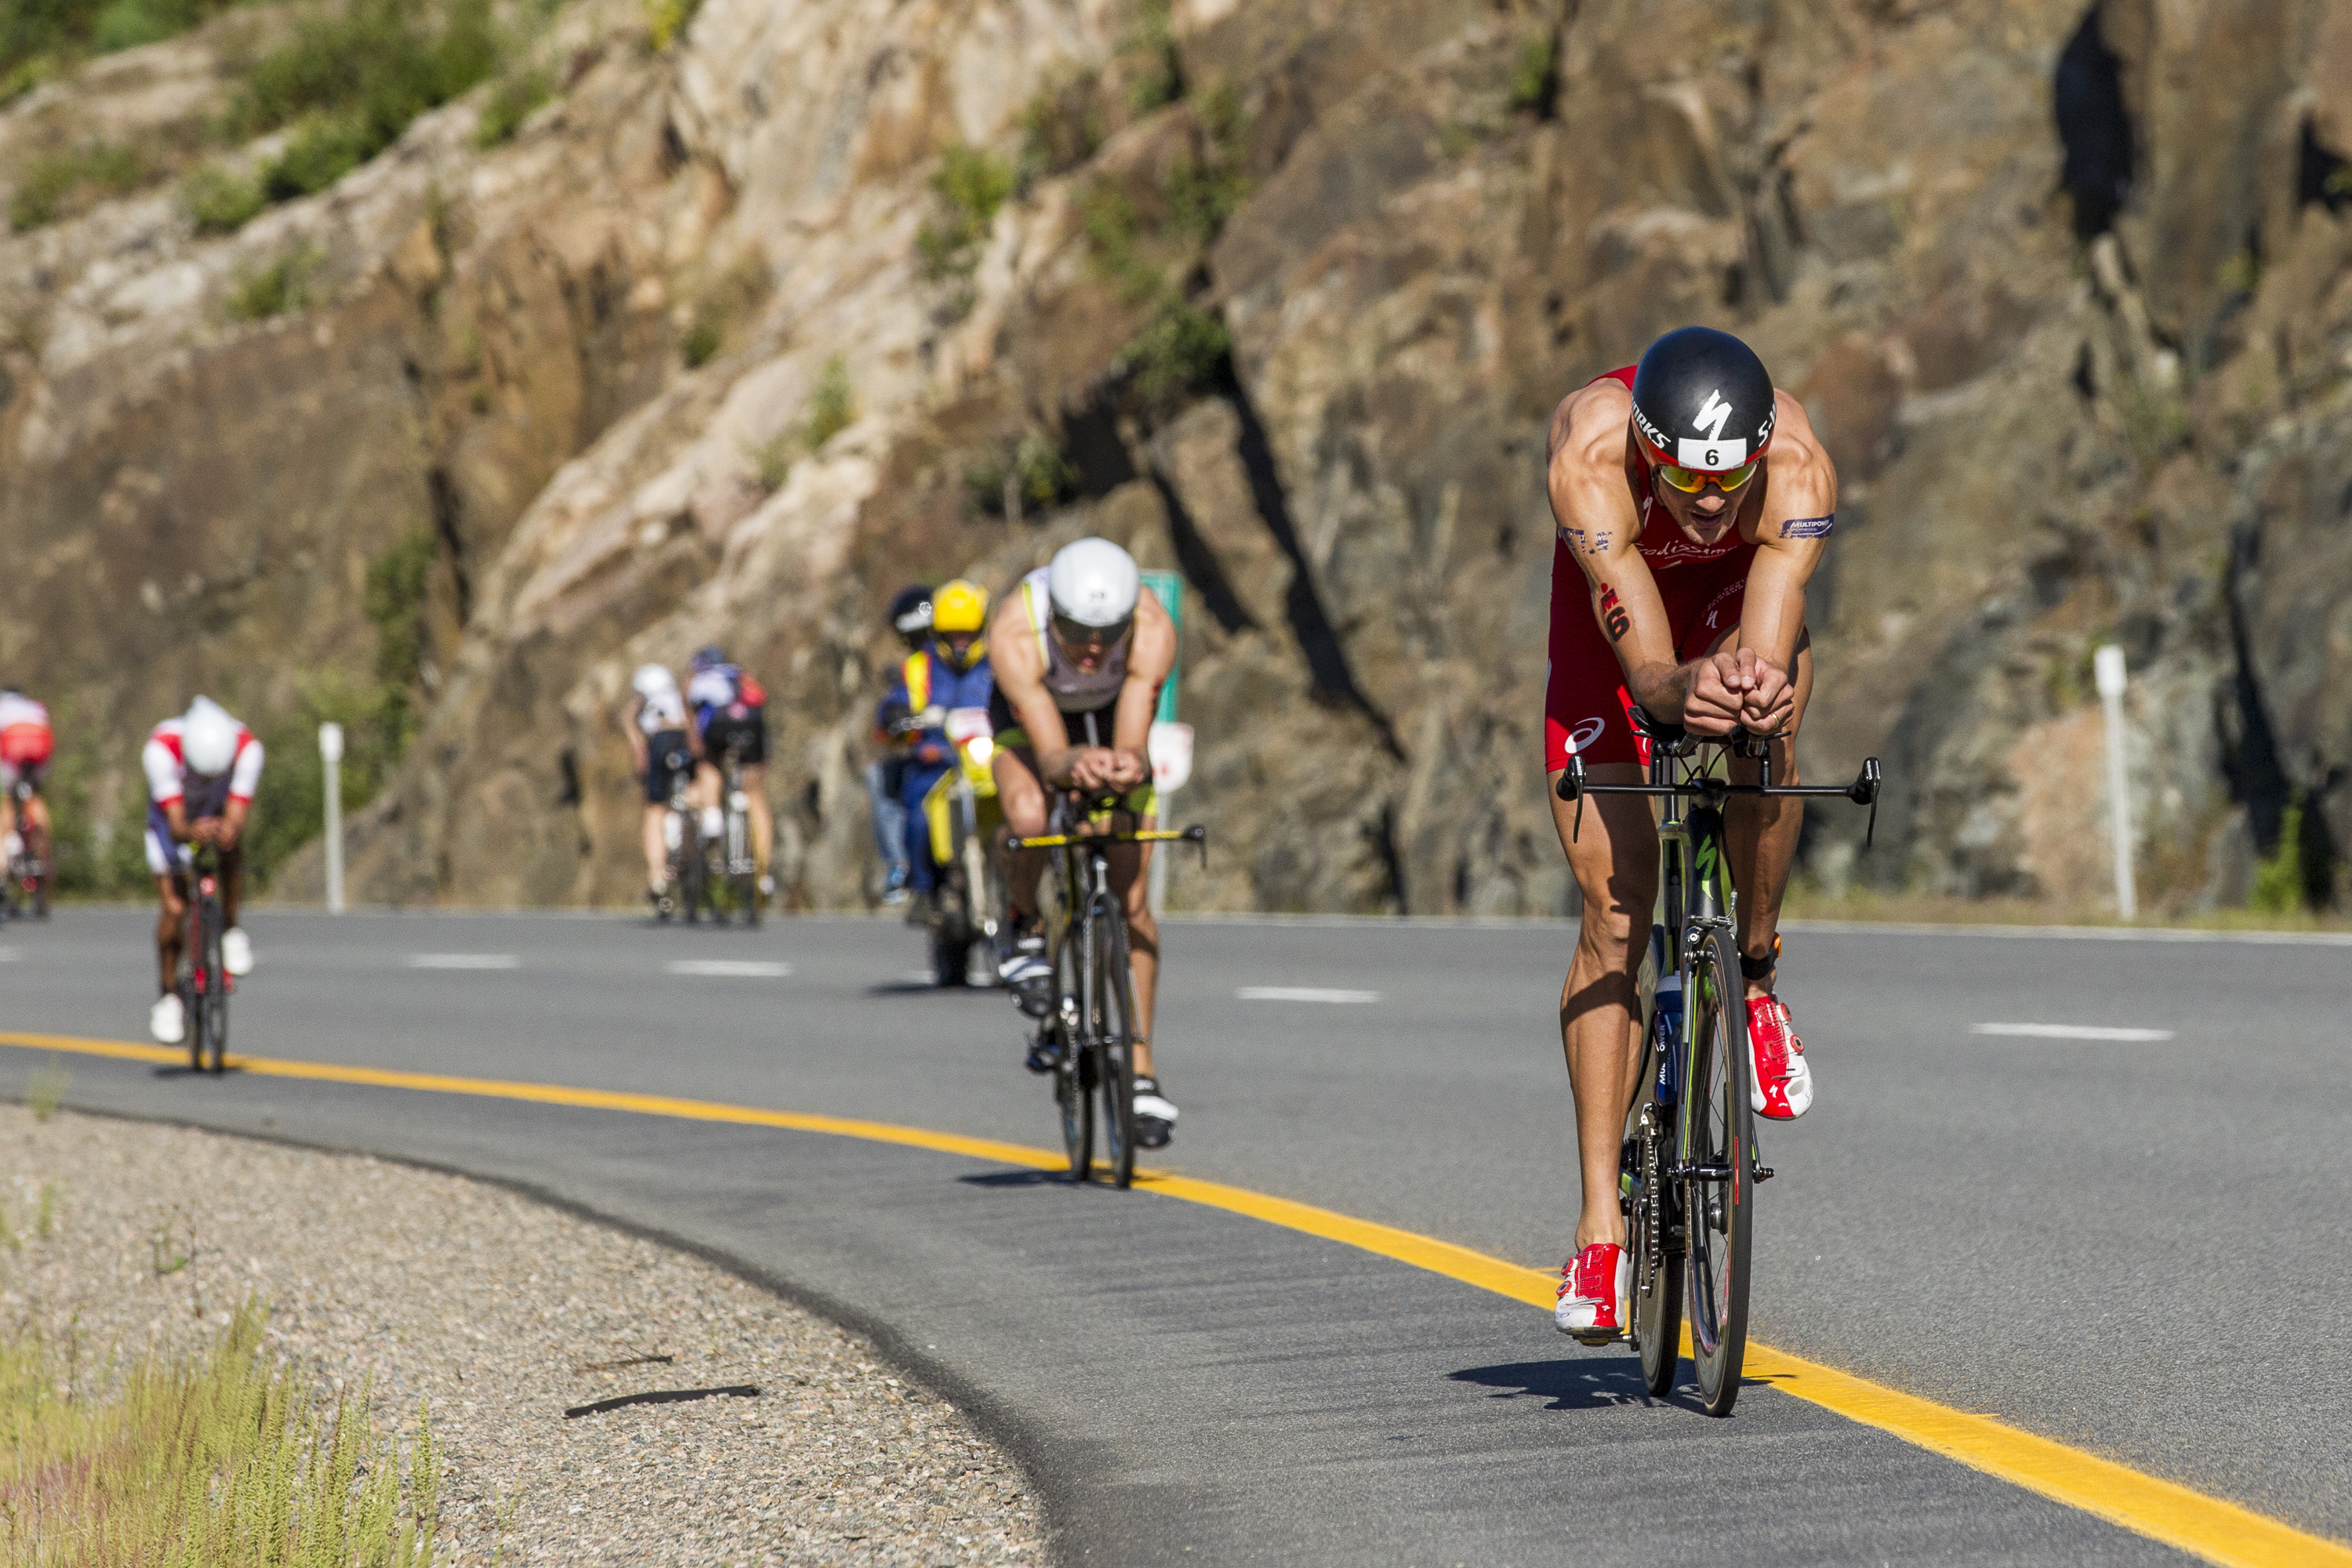 Ironman 70.3 World Championships Could we see two Canadians come out